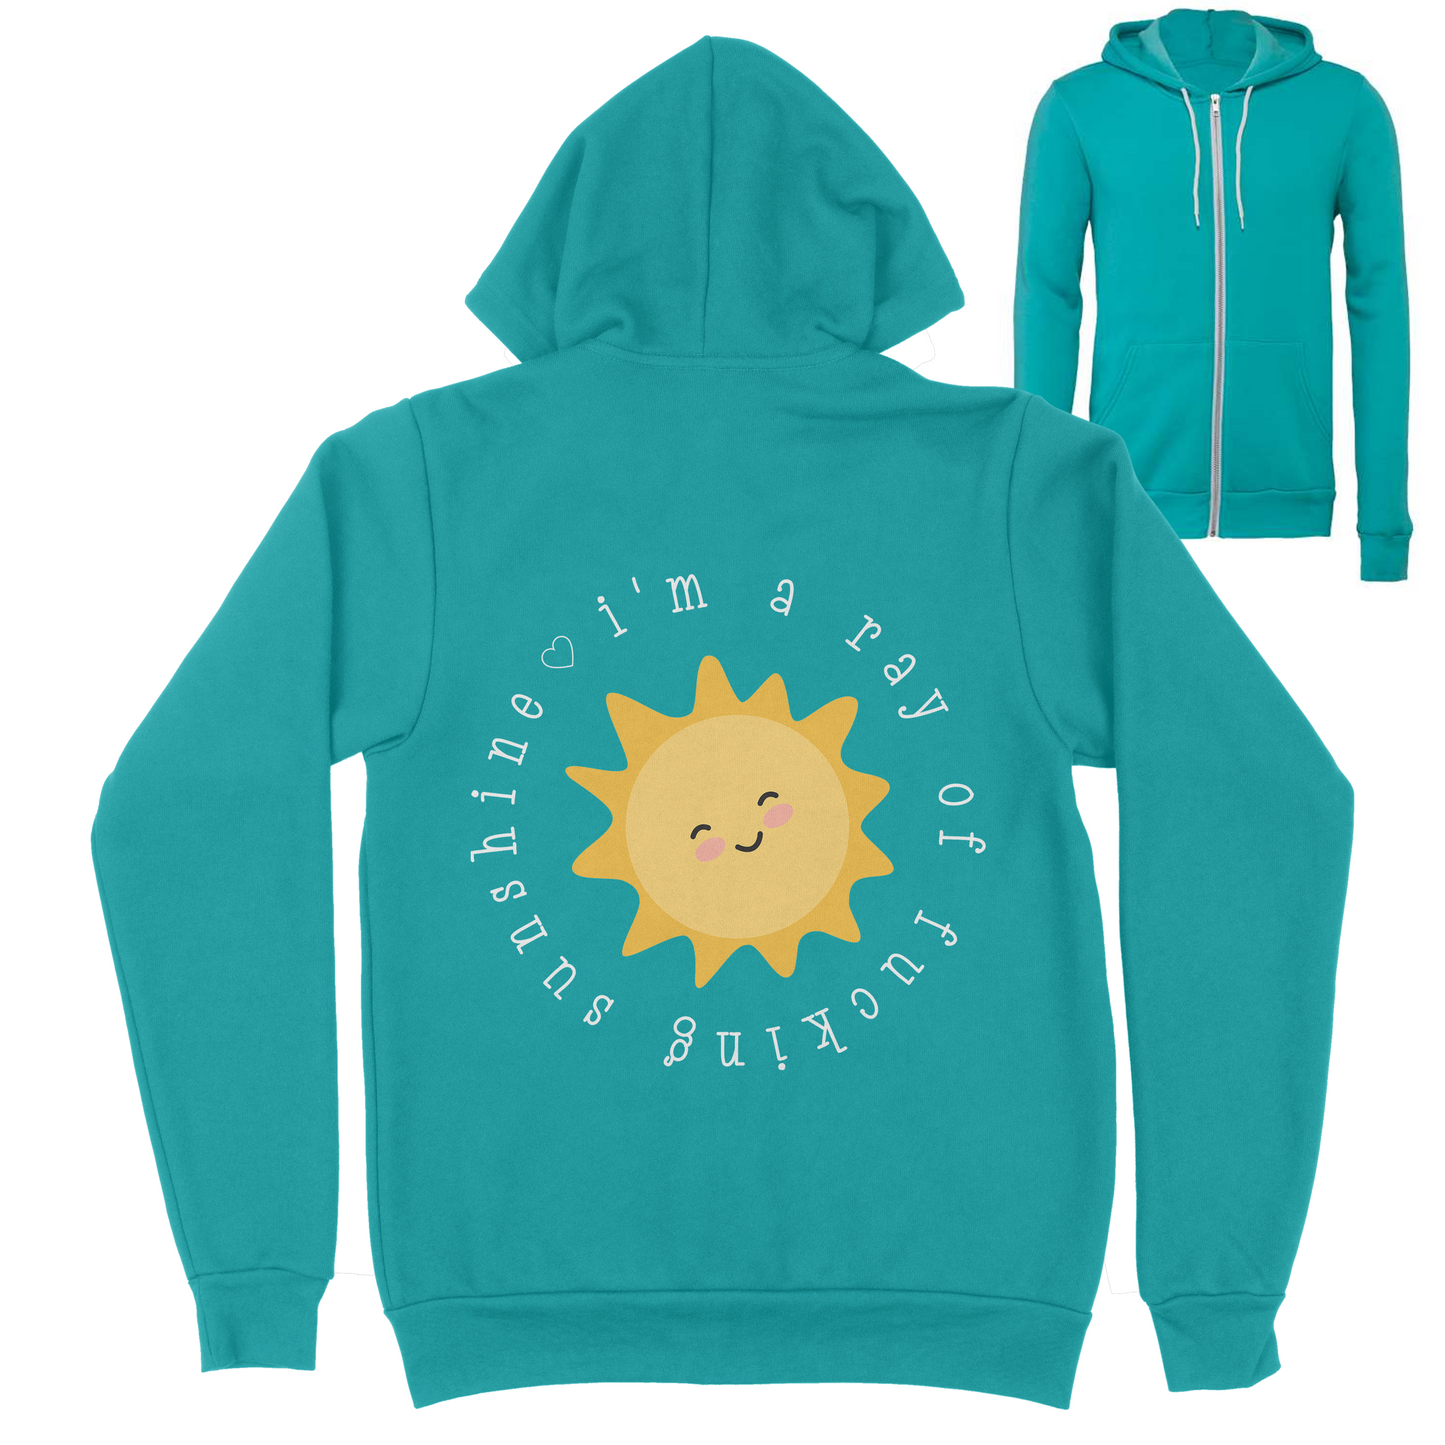 I'm A Ray Of Sunshine Zip Up Hoodie